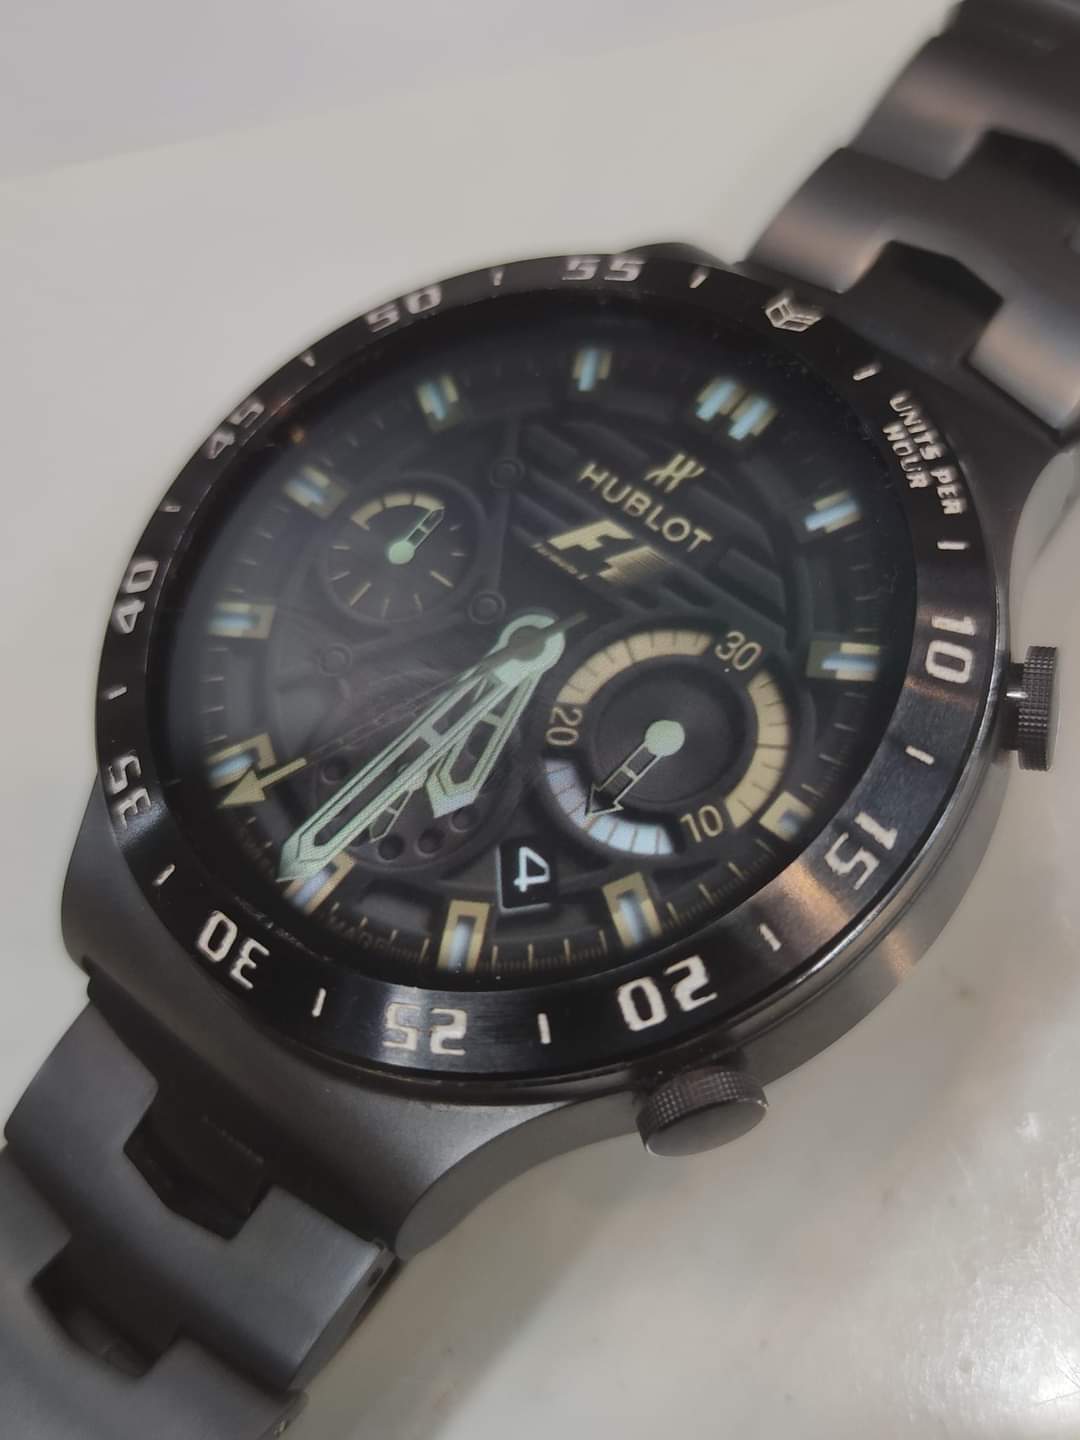 Hublot Gold Formula one ported HQ realistic watch face theme